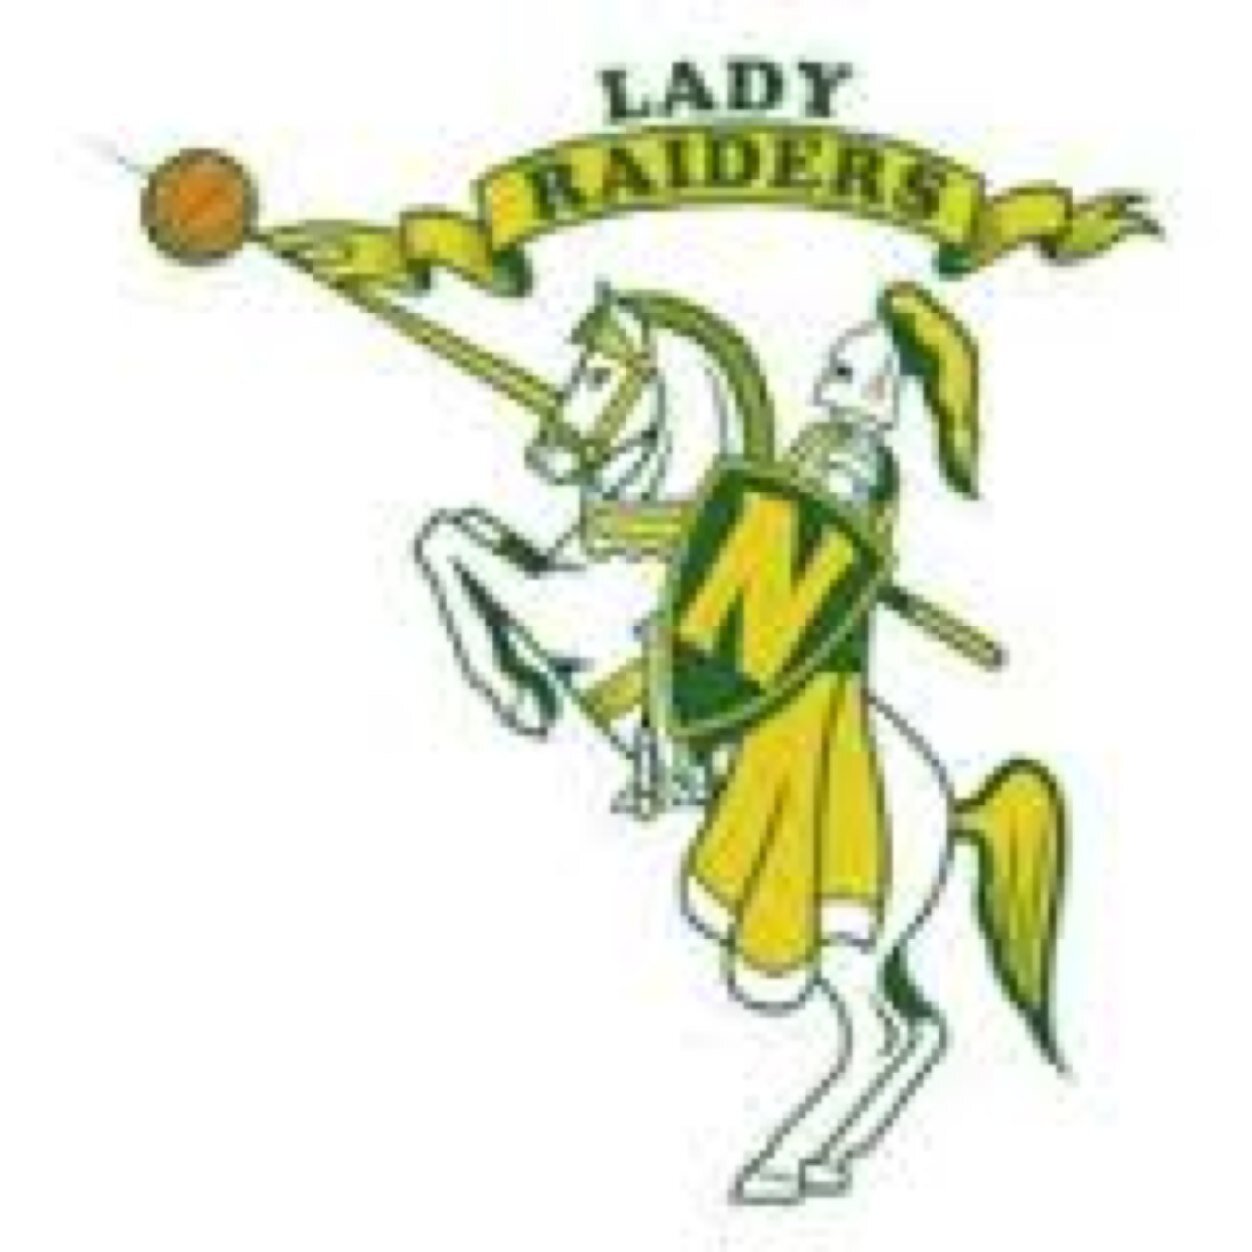 Team and player updates for the Northridge High School Lady Raiders 🔰🏀————————————————————Family | Accountability | Passion | Selfless